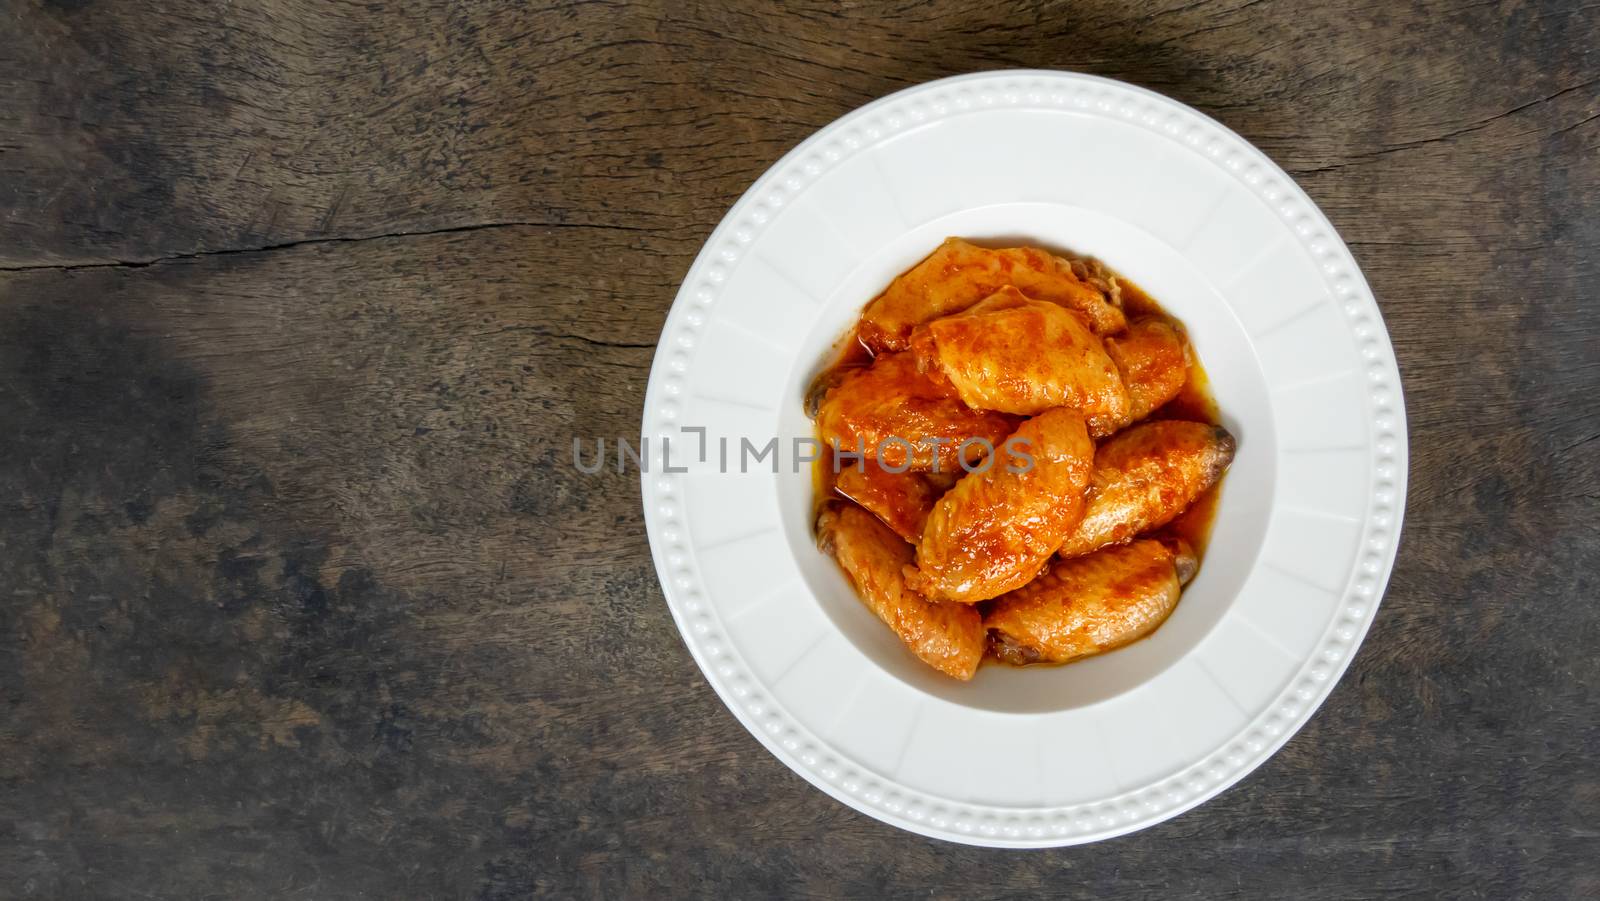 Baked chicken wings with spicy sauce. Food background with copy space. Top view